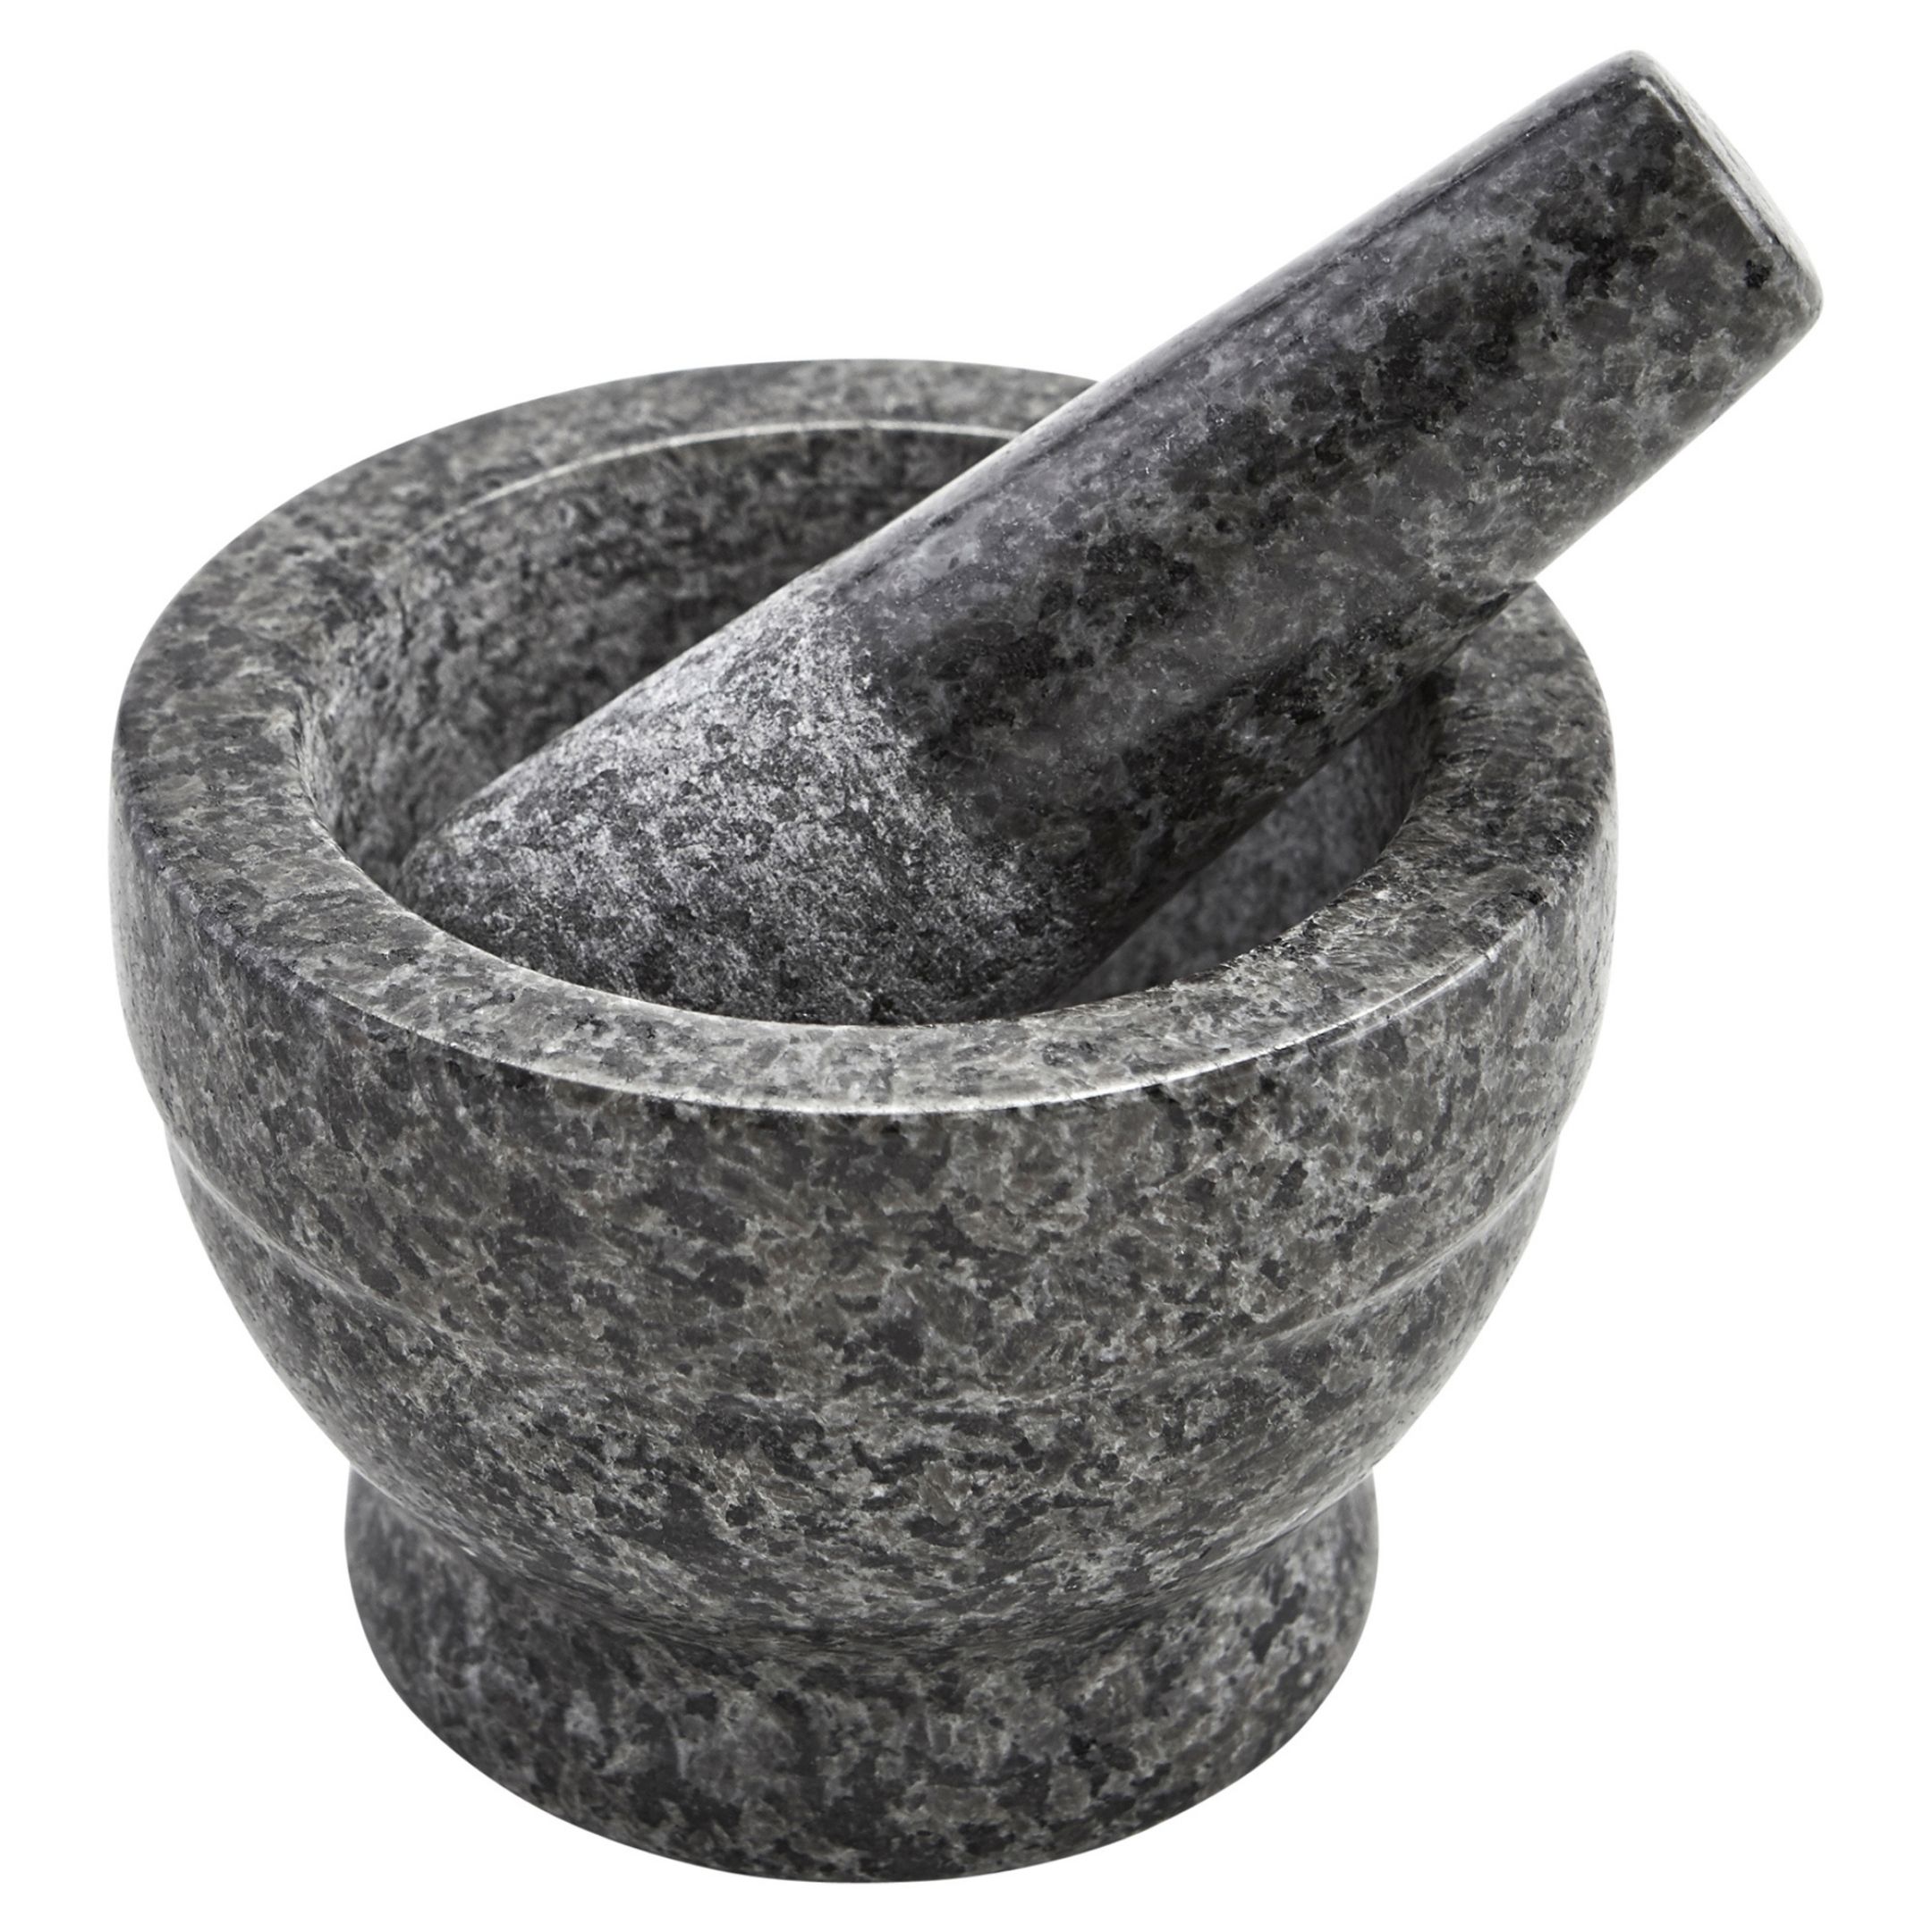 Imusa 3.75 inch Mini Polished Granite Mortar and Pestle for Grinding and Crushing, Gray (3.7" x 3.7" x 2.8") - image 1 of 11